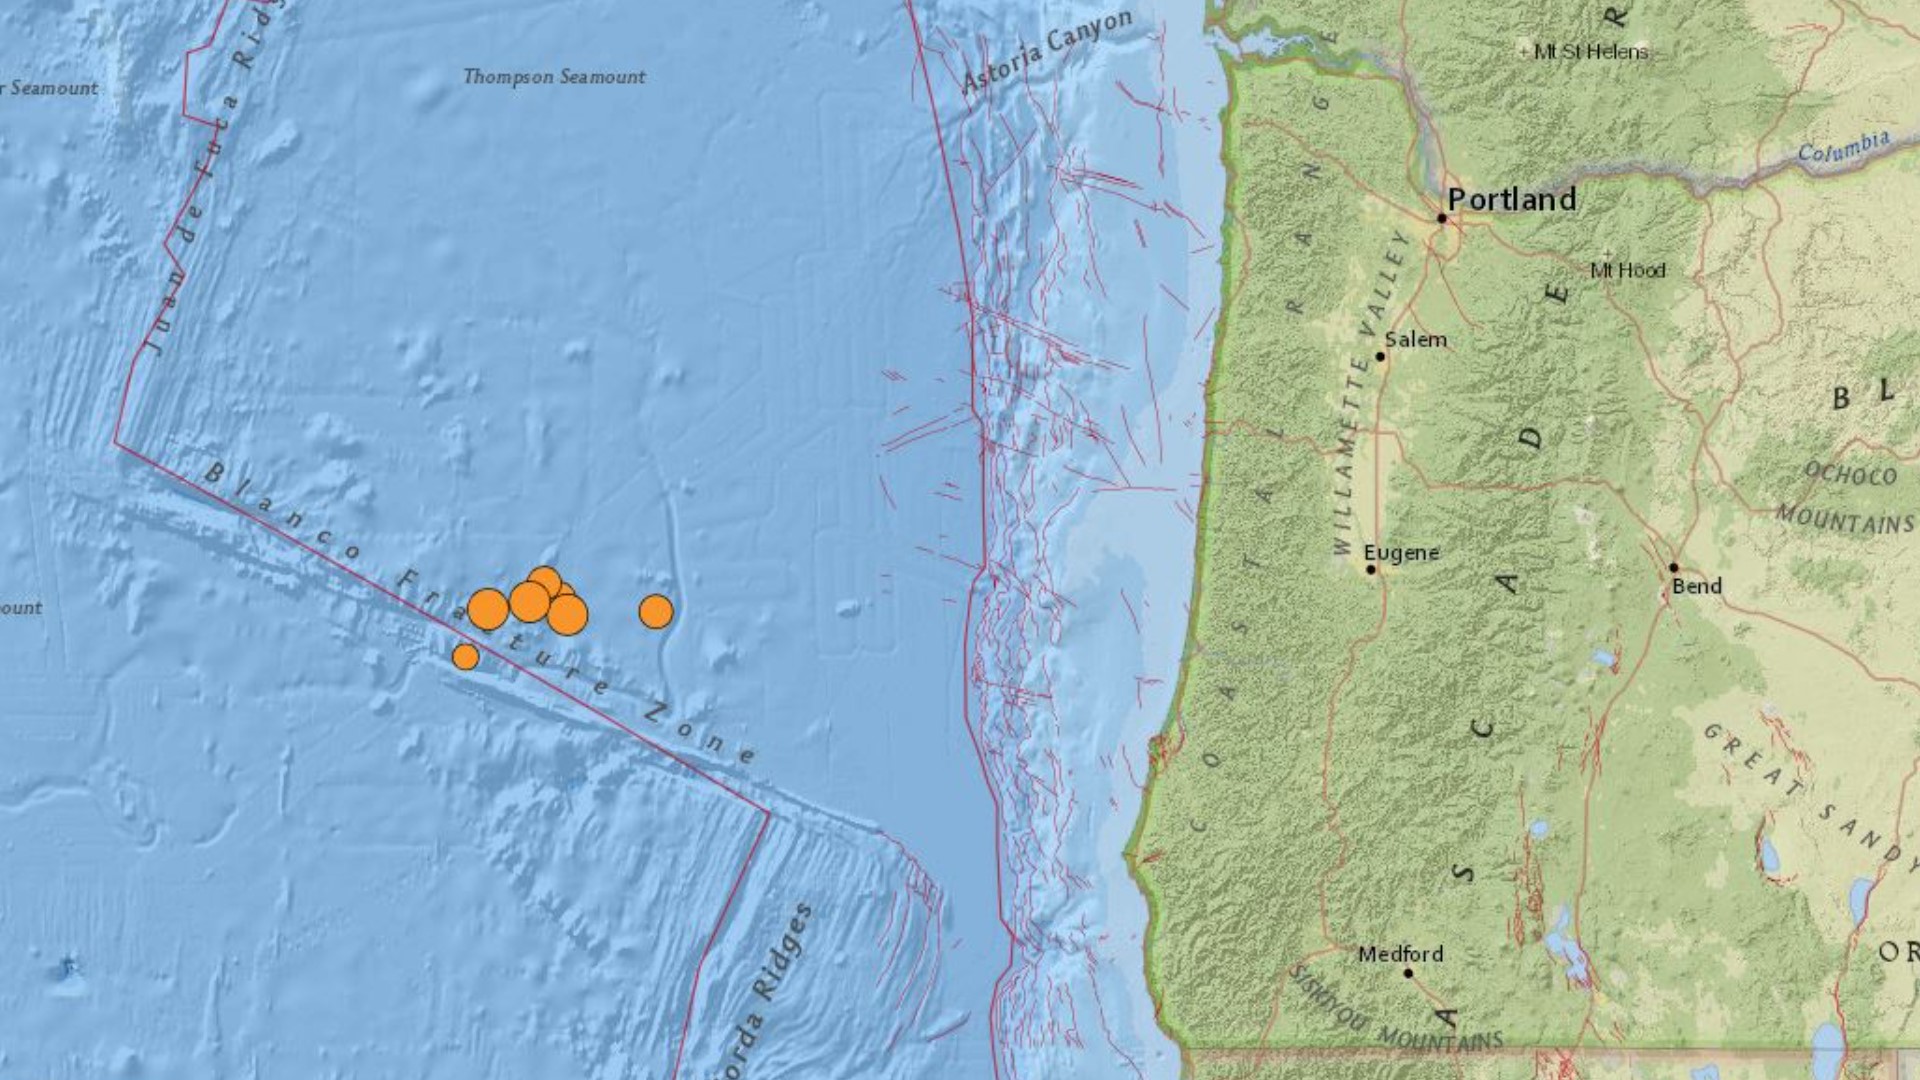 Four earthquakes struck off the coast early Thursday morning, about 180 miles west of Bandon. This followed an earthquake in the same area Wednesday afternoon.